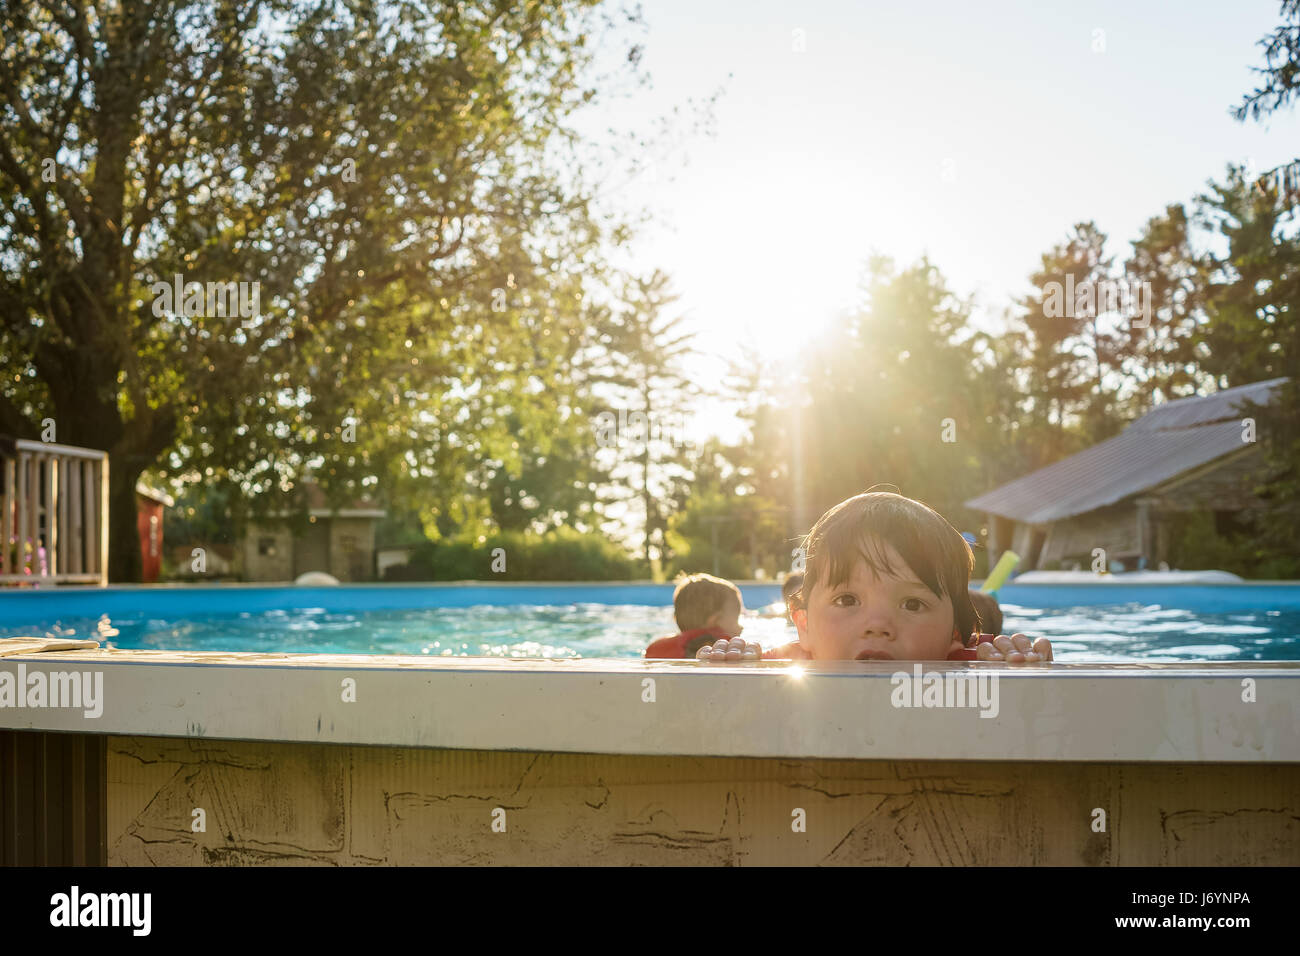 Boy peering over the edge of a swimming pool with siblings in the background Stock Photo